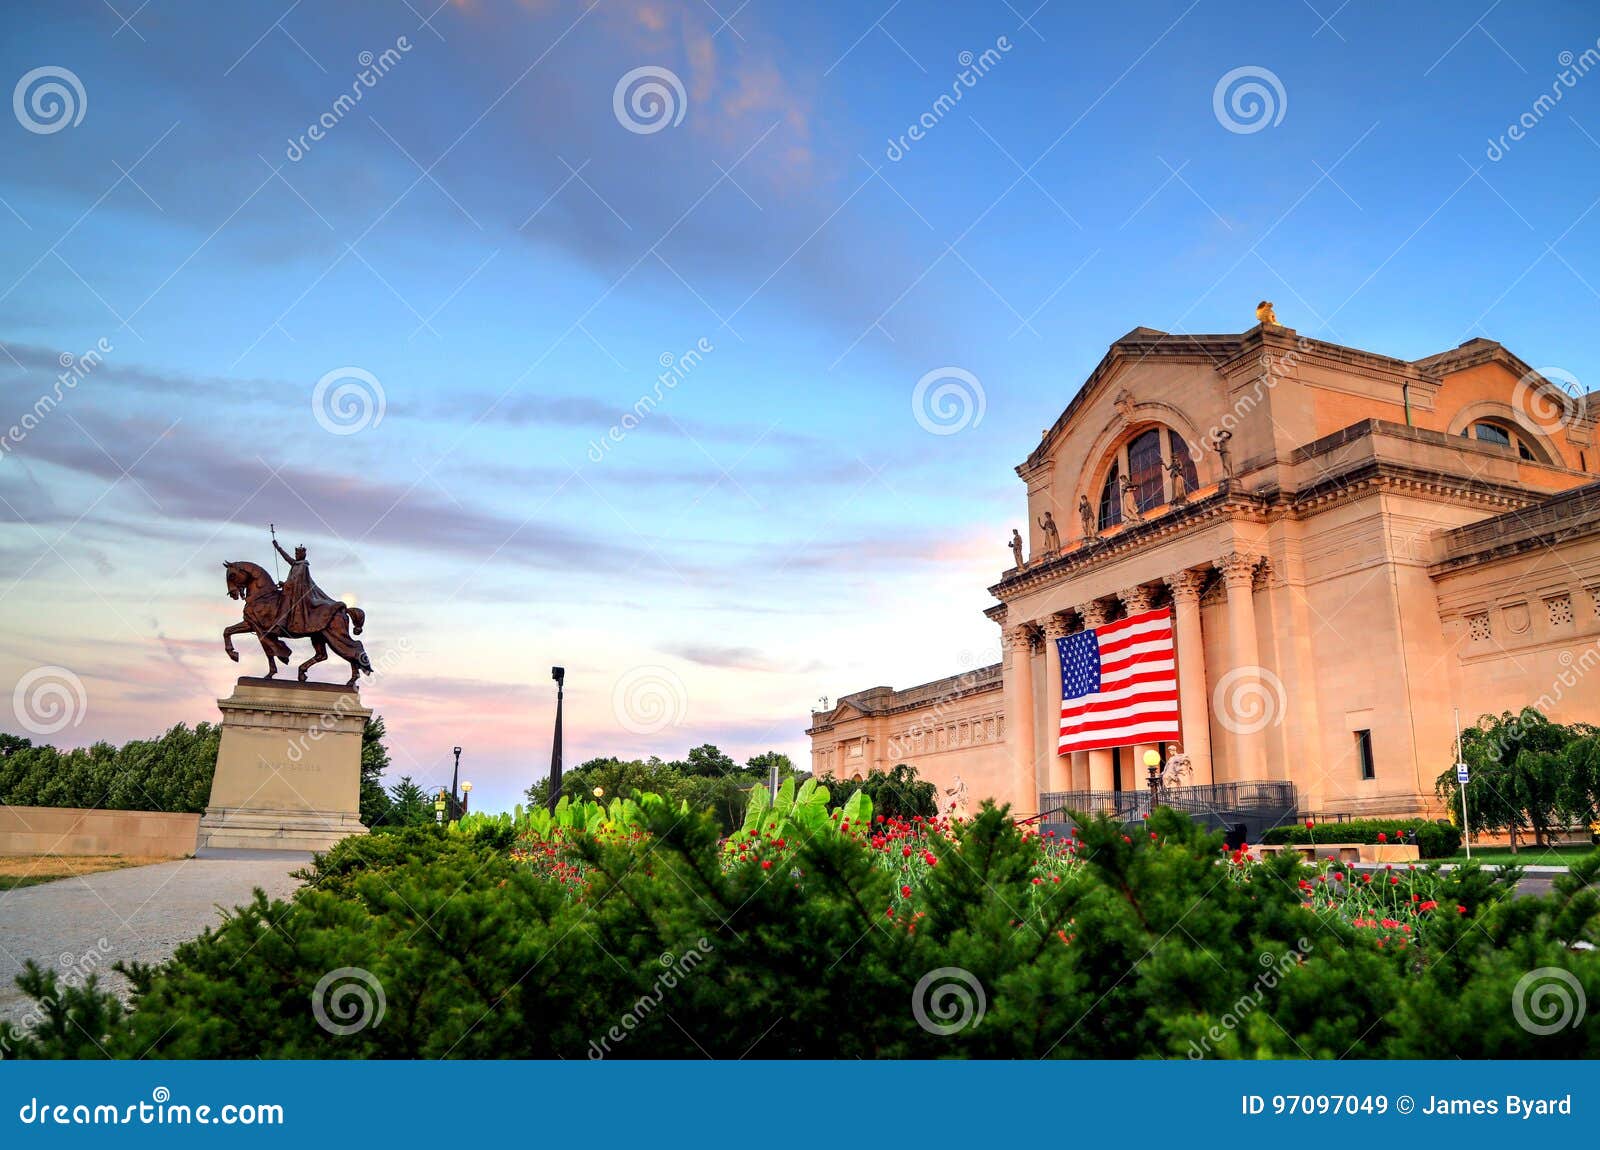 Art Hill In St. Louis, Missouri Stock Image - Image of hill, basin: 97097049